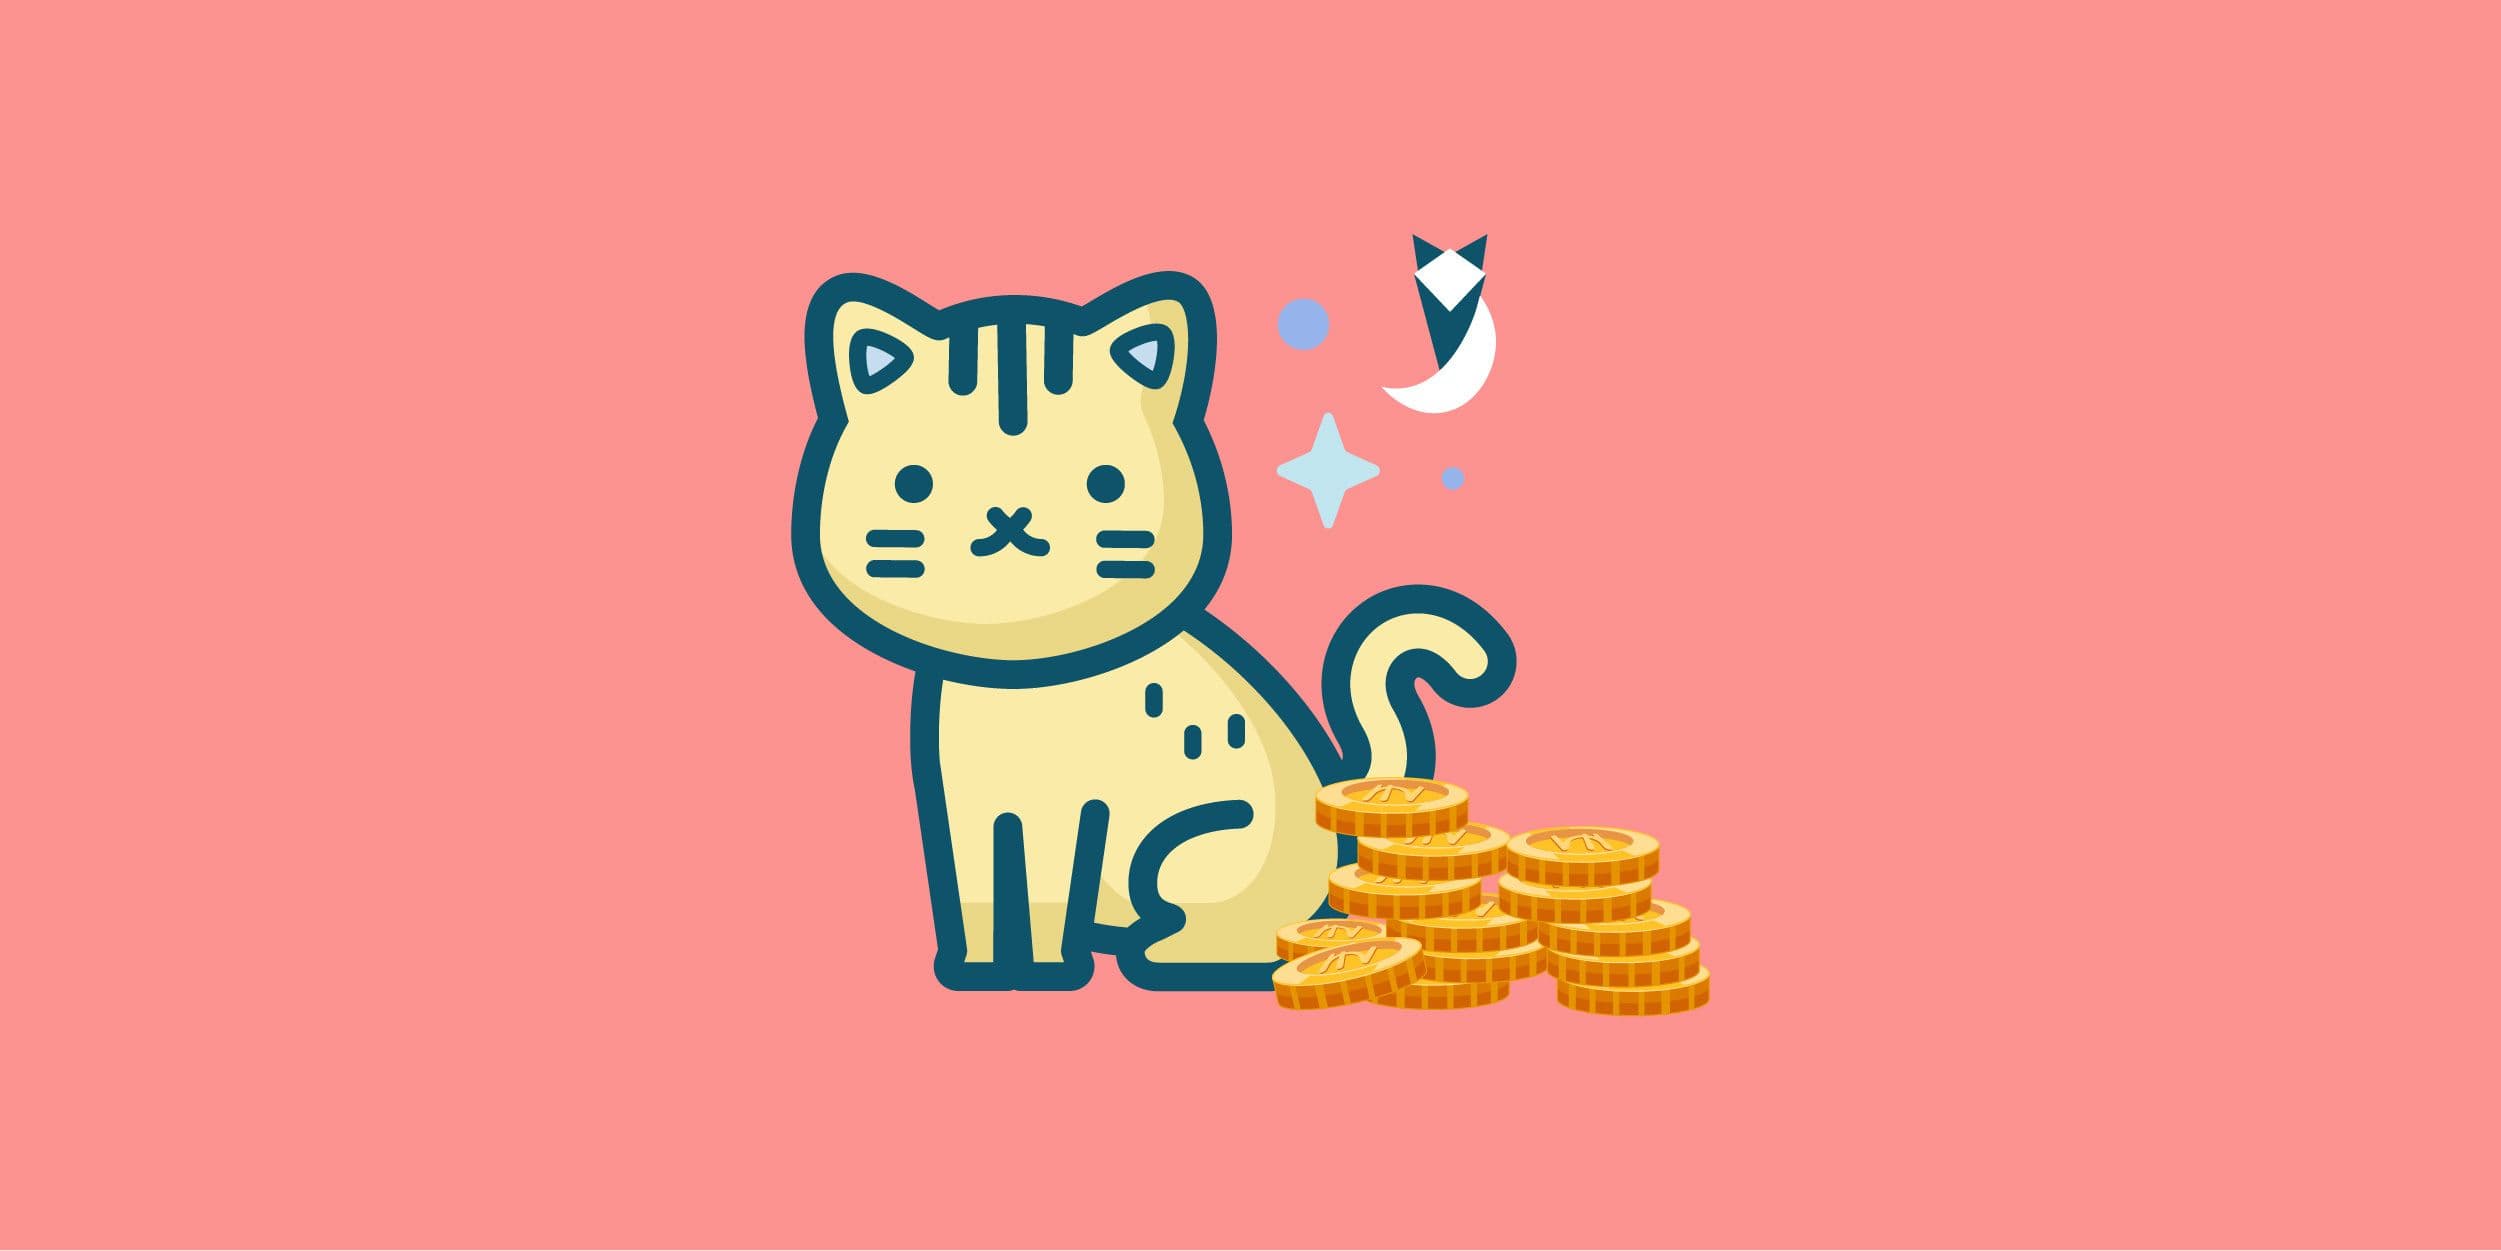 How much does your cat adoption costs you per year? 